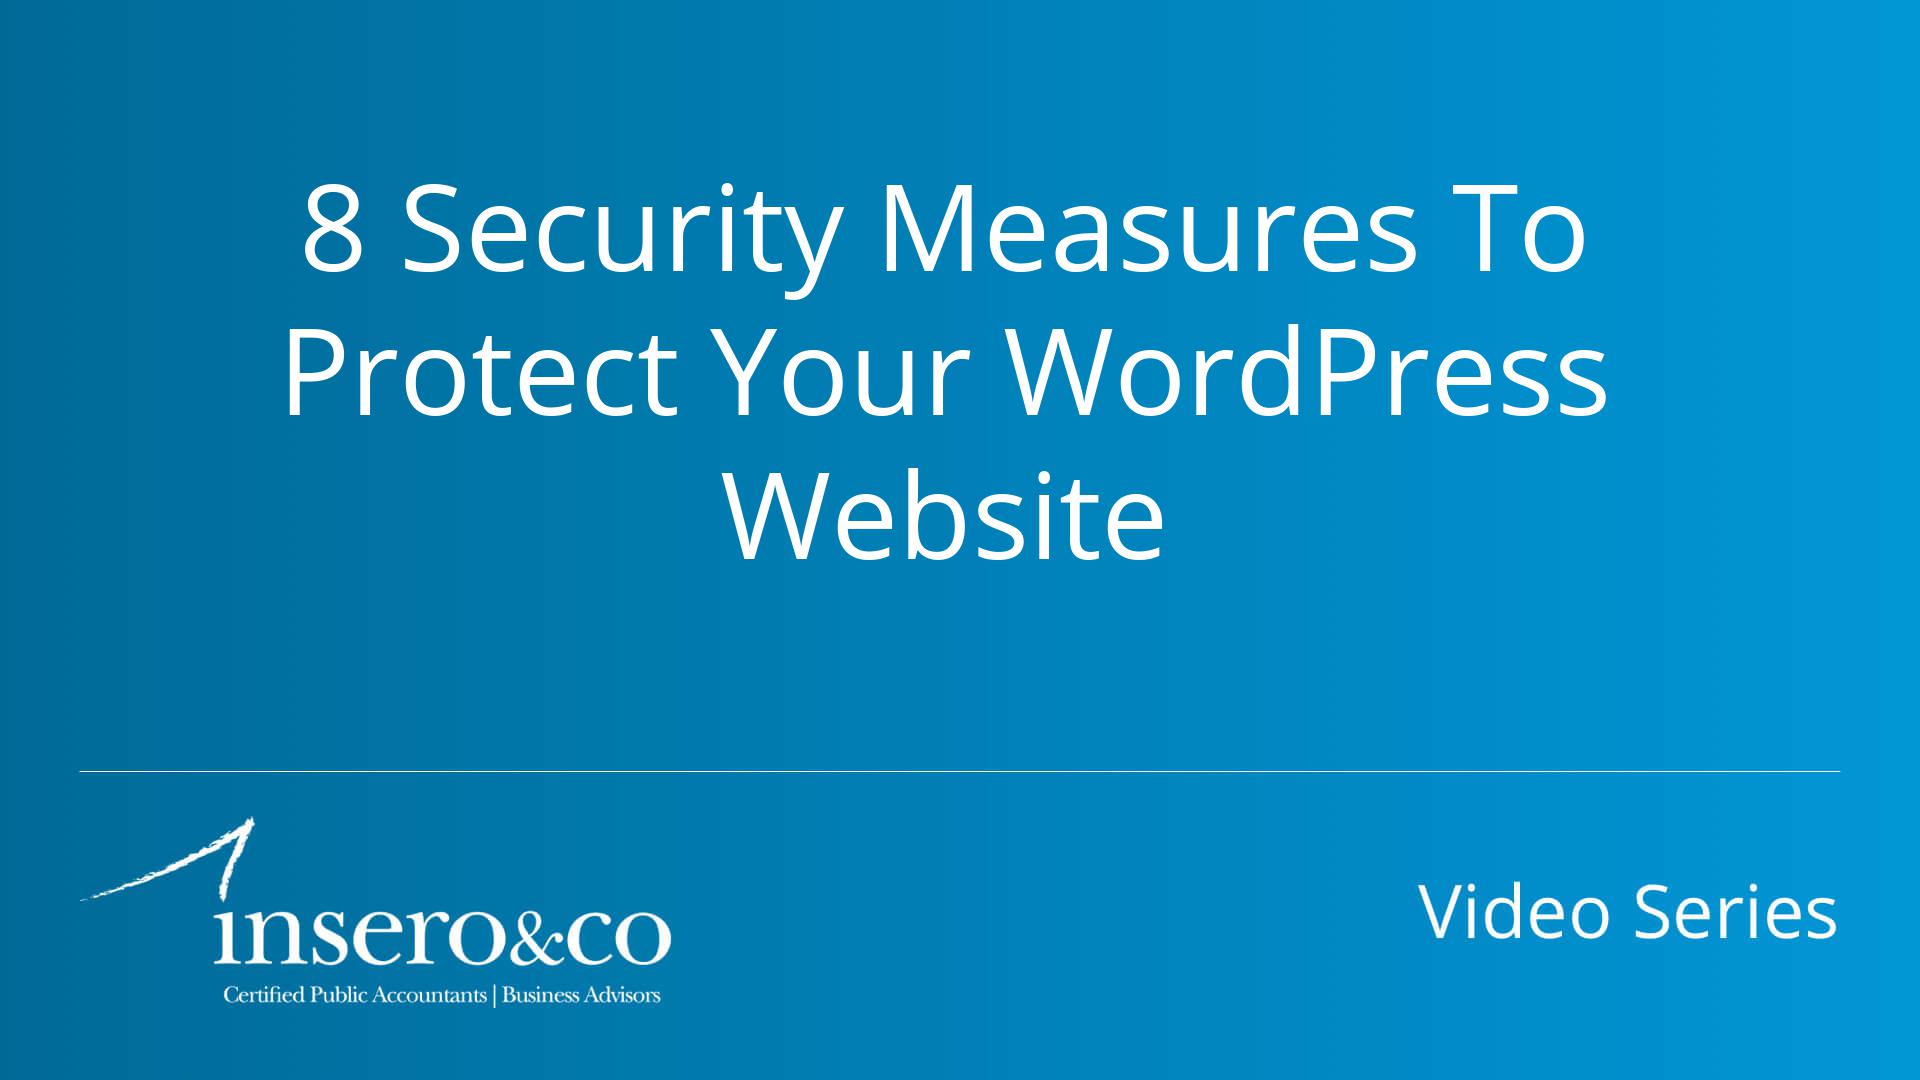 8 Security Measure to Protect Your WordPress Website